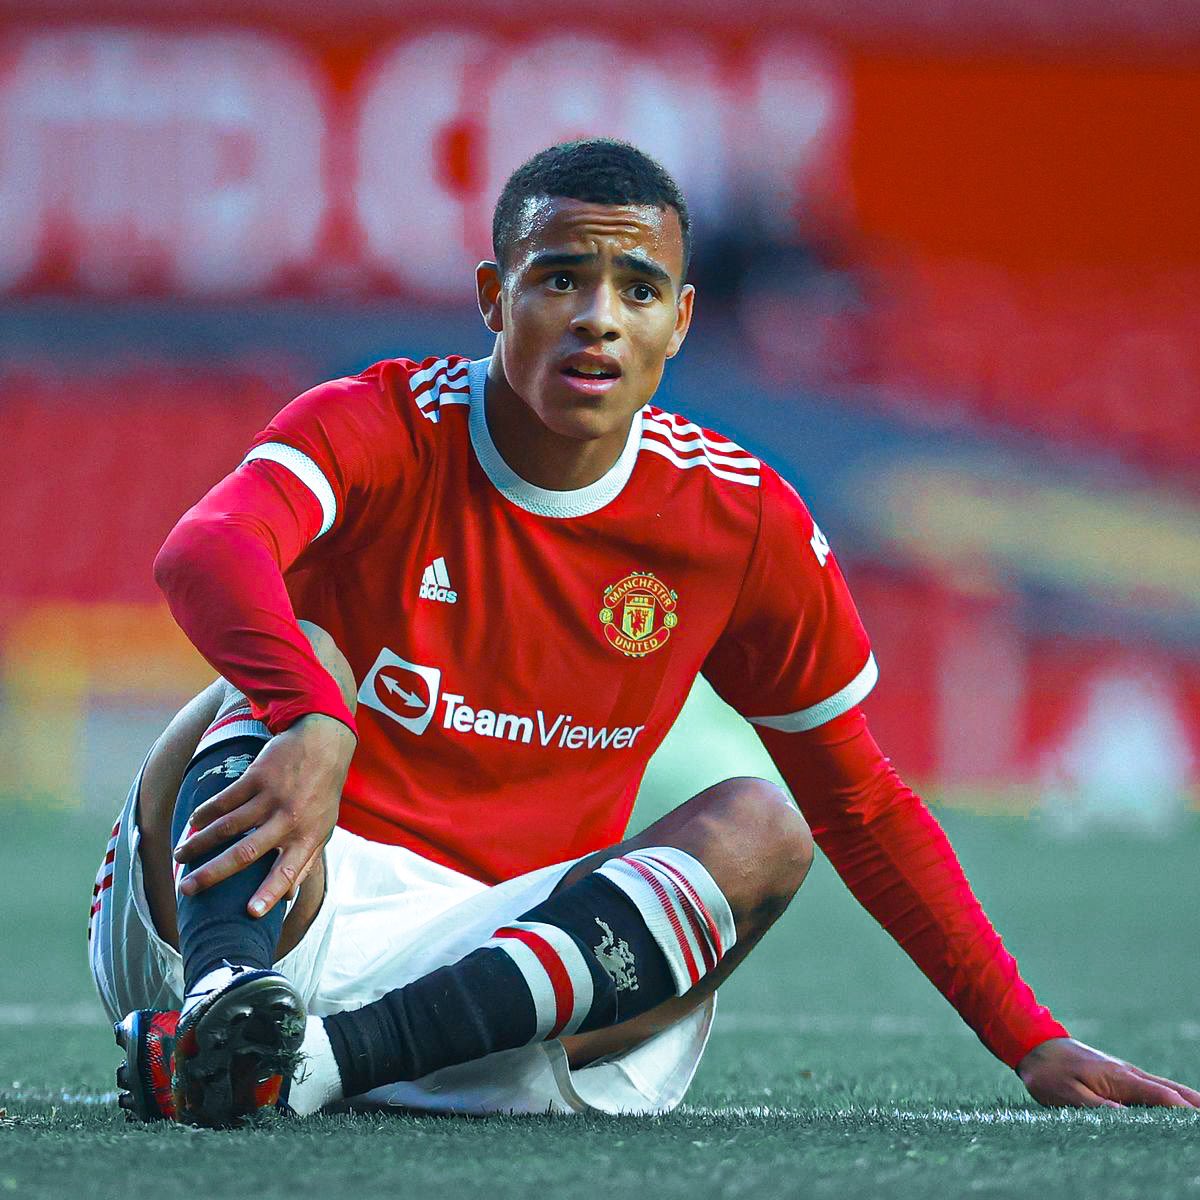 All signs hint that Manchester United are going to bring back Mason Greenwood. What an awful and cowardly decision that will be.